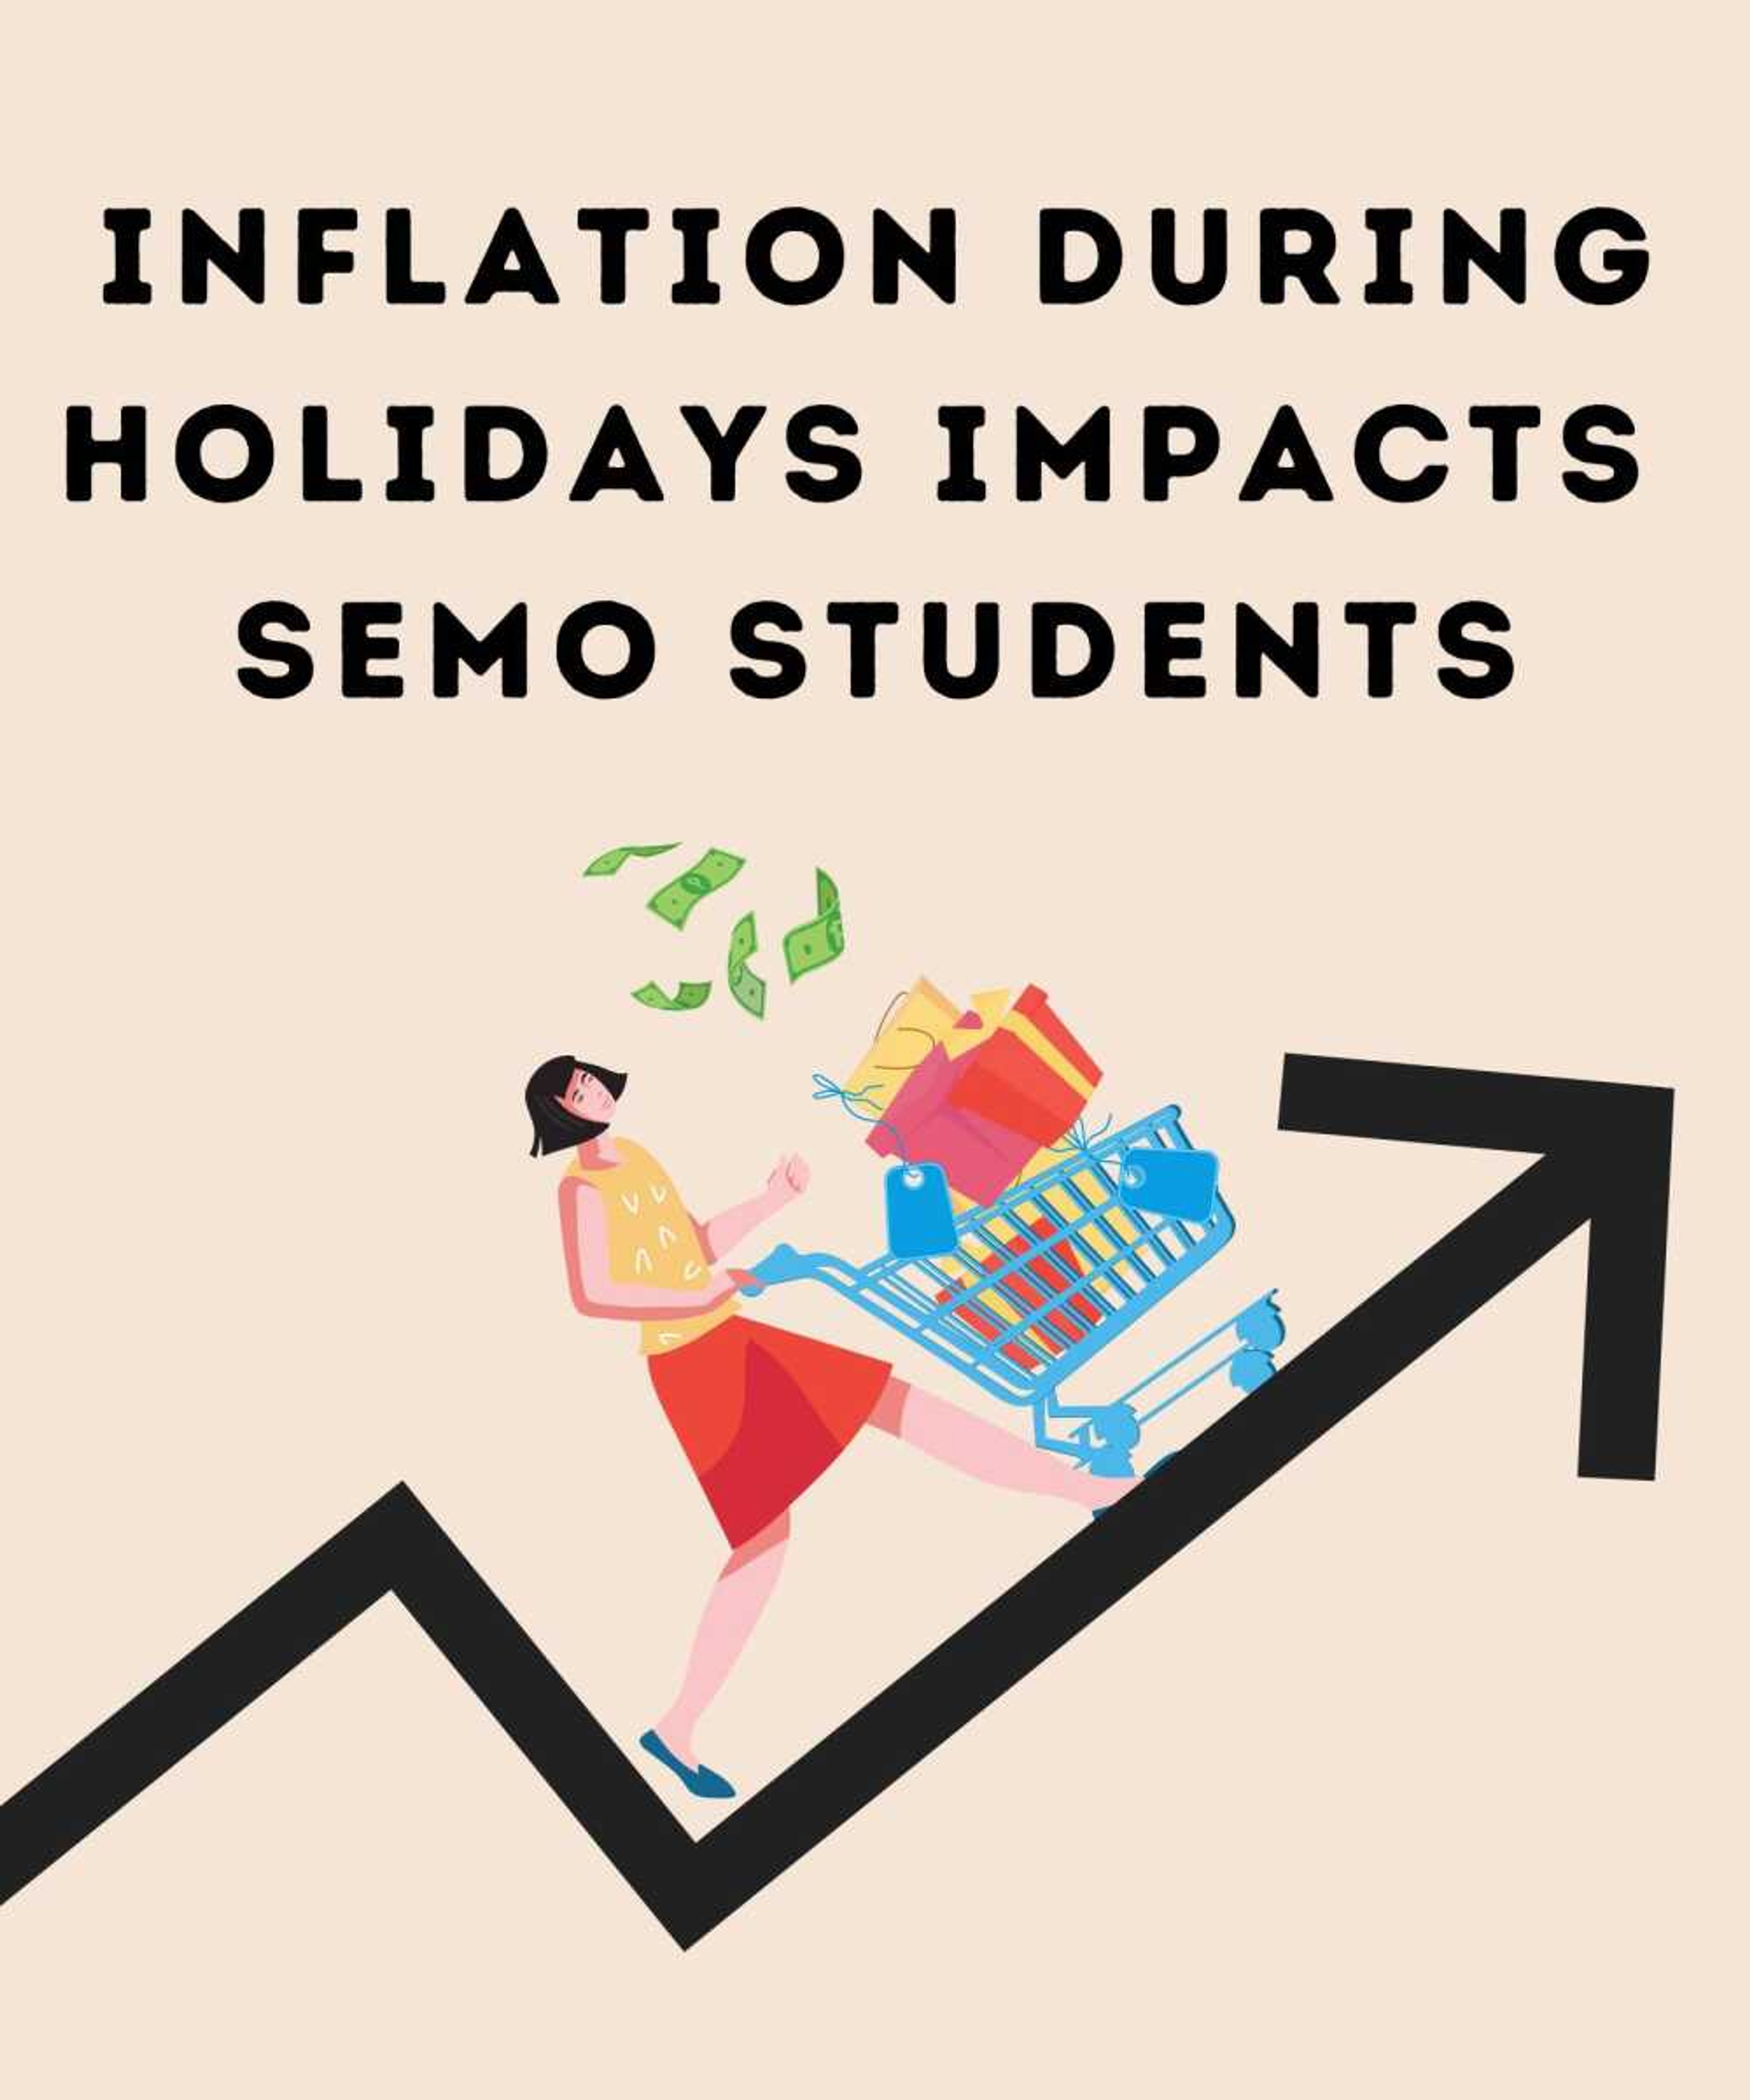 Inflation during holidays impacts SEMO students